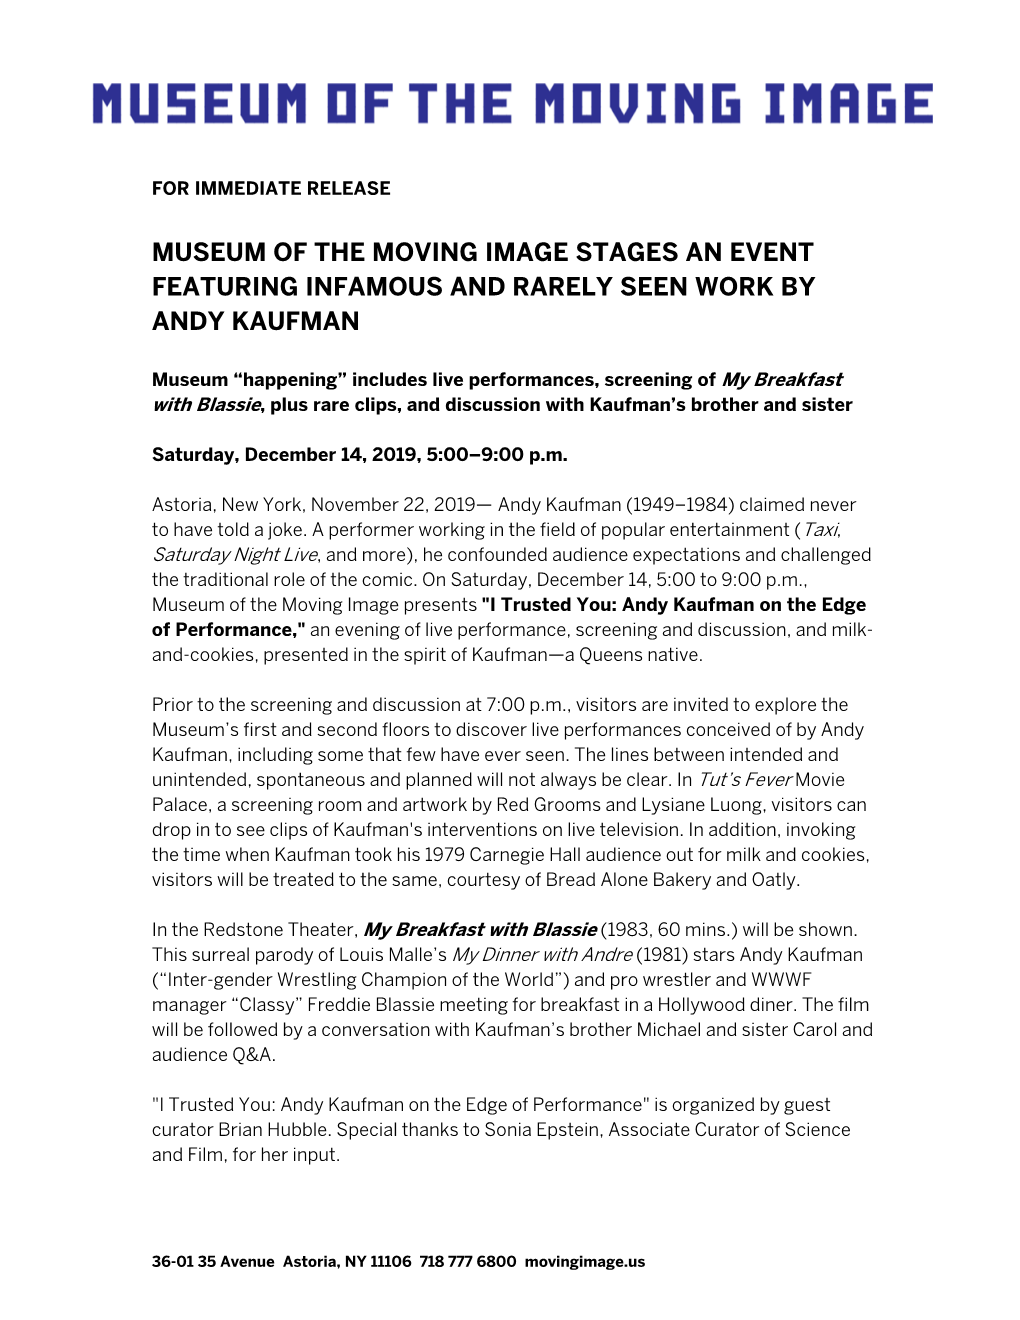 Museum of the Moving Image Stages an Event Featuring Infamous and Rarely Seen Work by Andy Kaufman